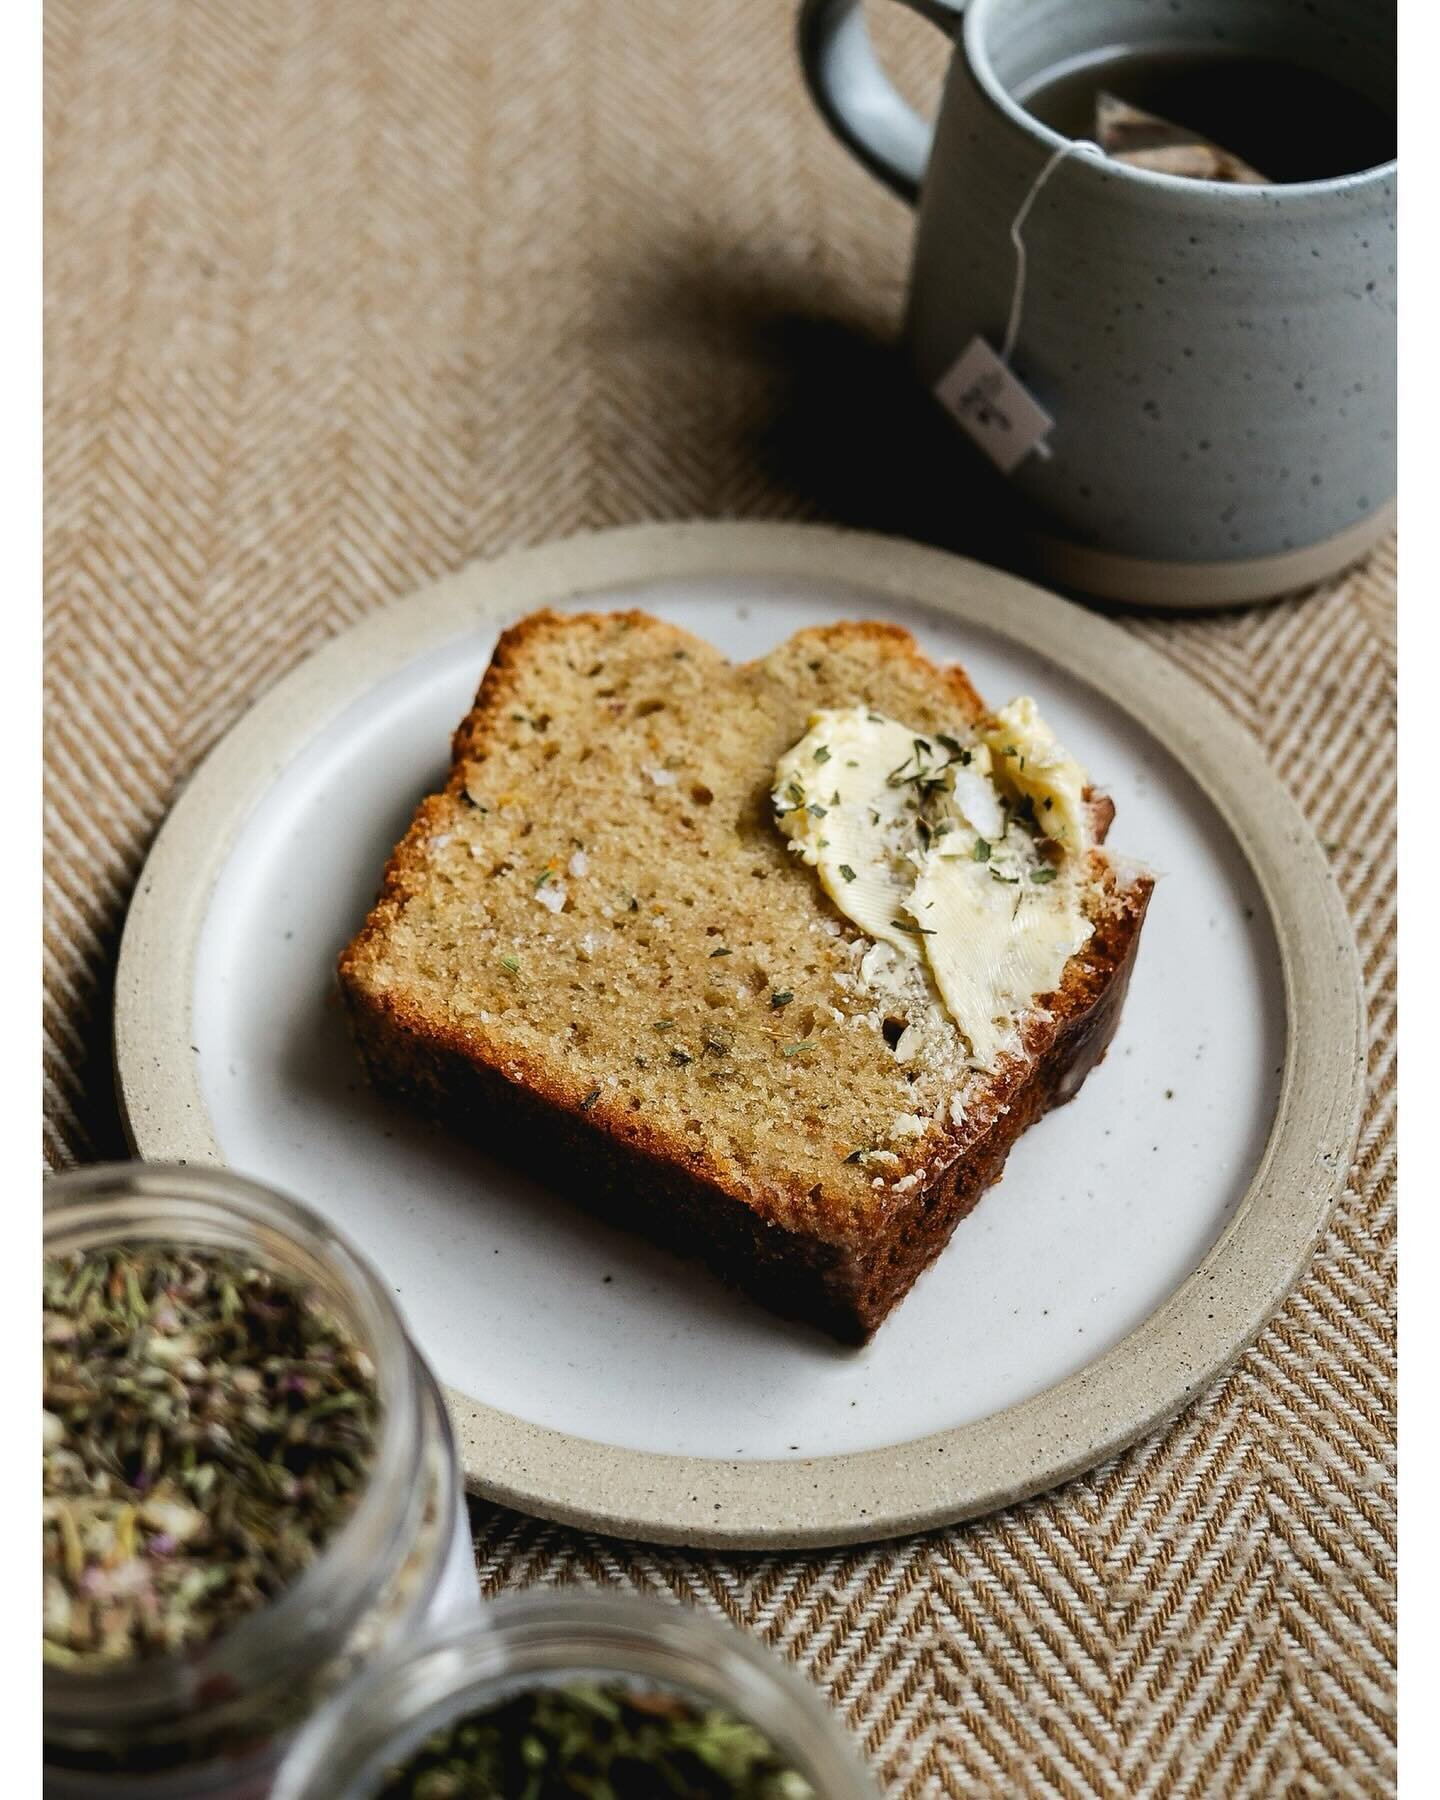 A cake for tea, made in collaboration with the lovely @rhoeco and perfect for cozy winter days. This Almond and Orange Cake with Thyme has a moist, nutty crumb and crunchy, glaze-coated crust, all brightened by fragrant orange and thyme. It&rsquo;s a